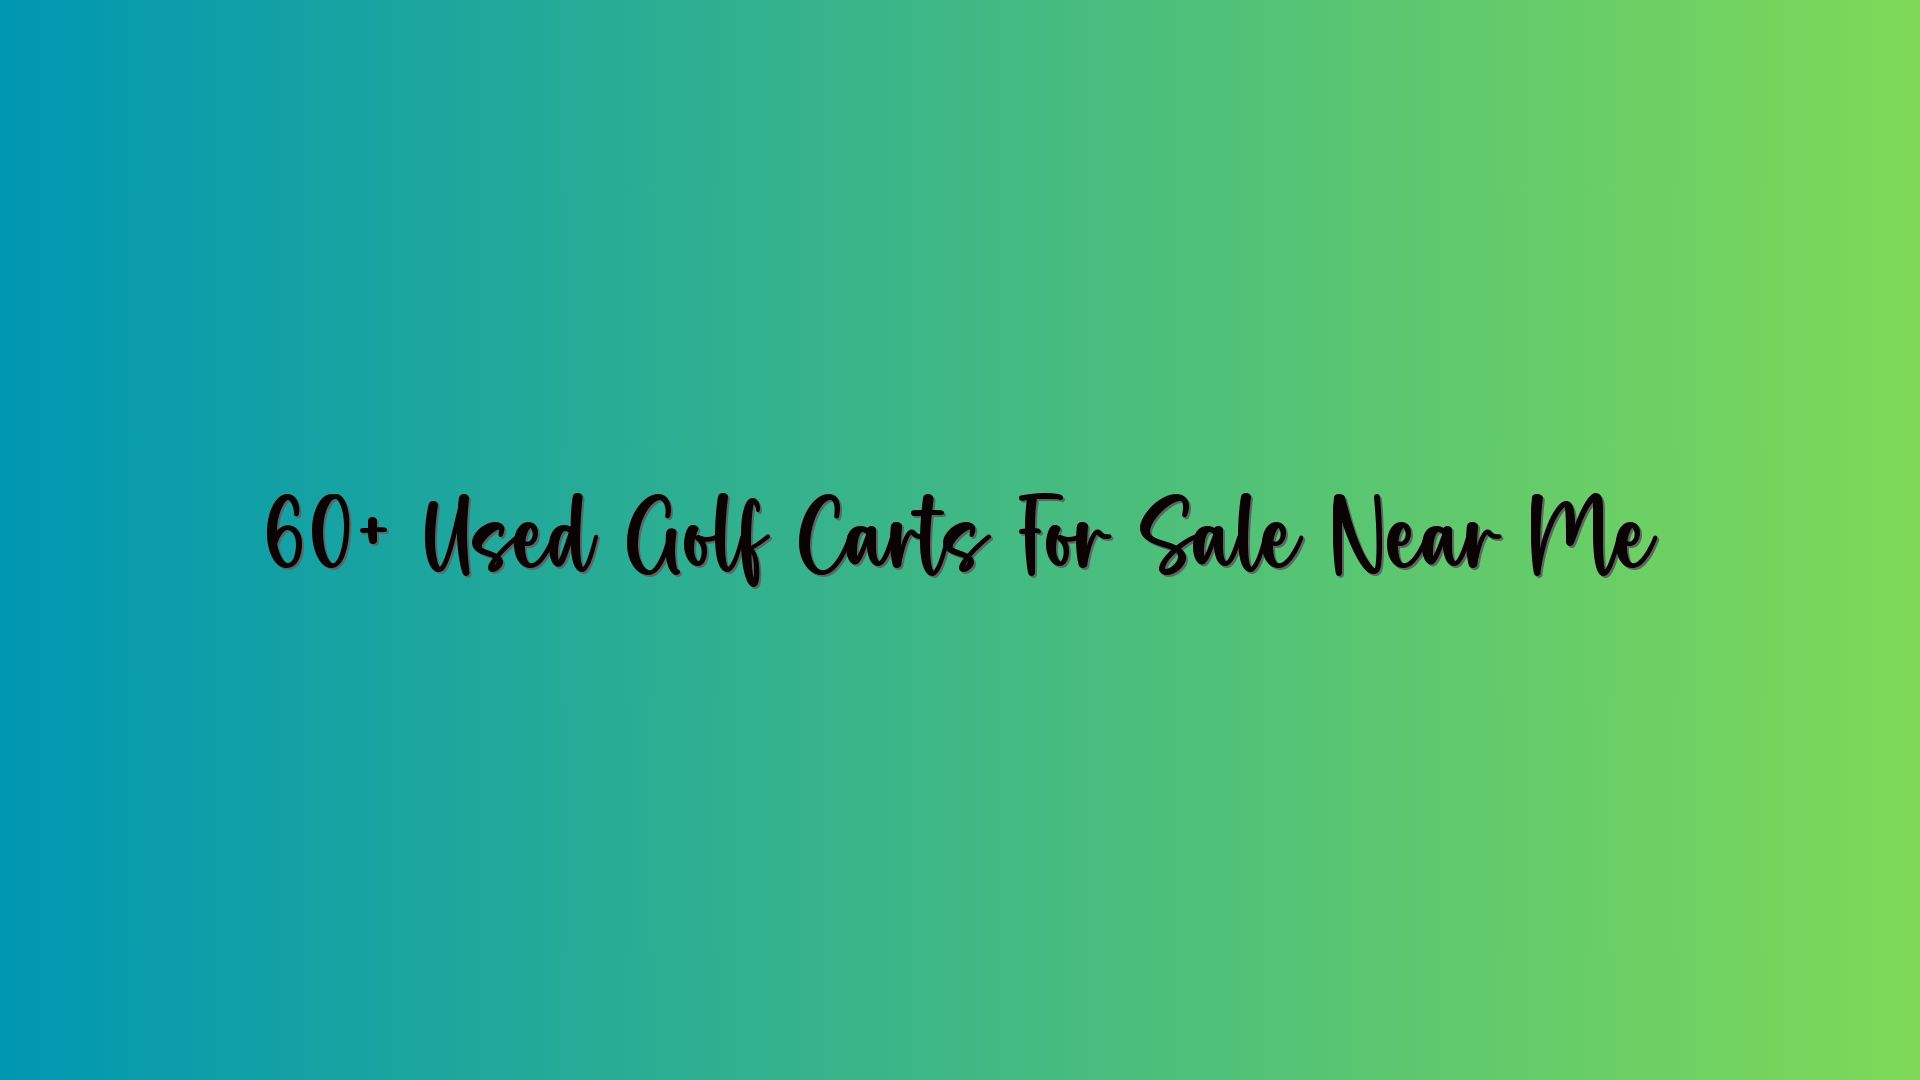 60+ Used Golf Carts For Sale Near Me